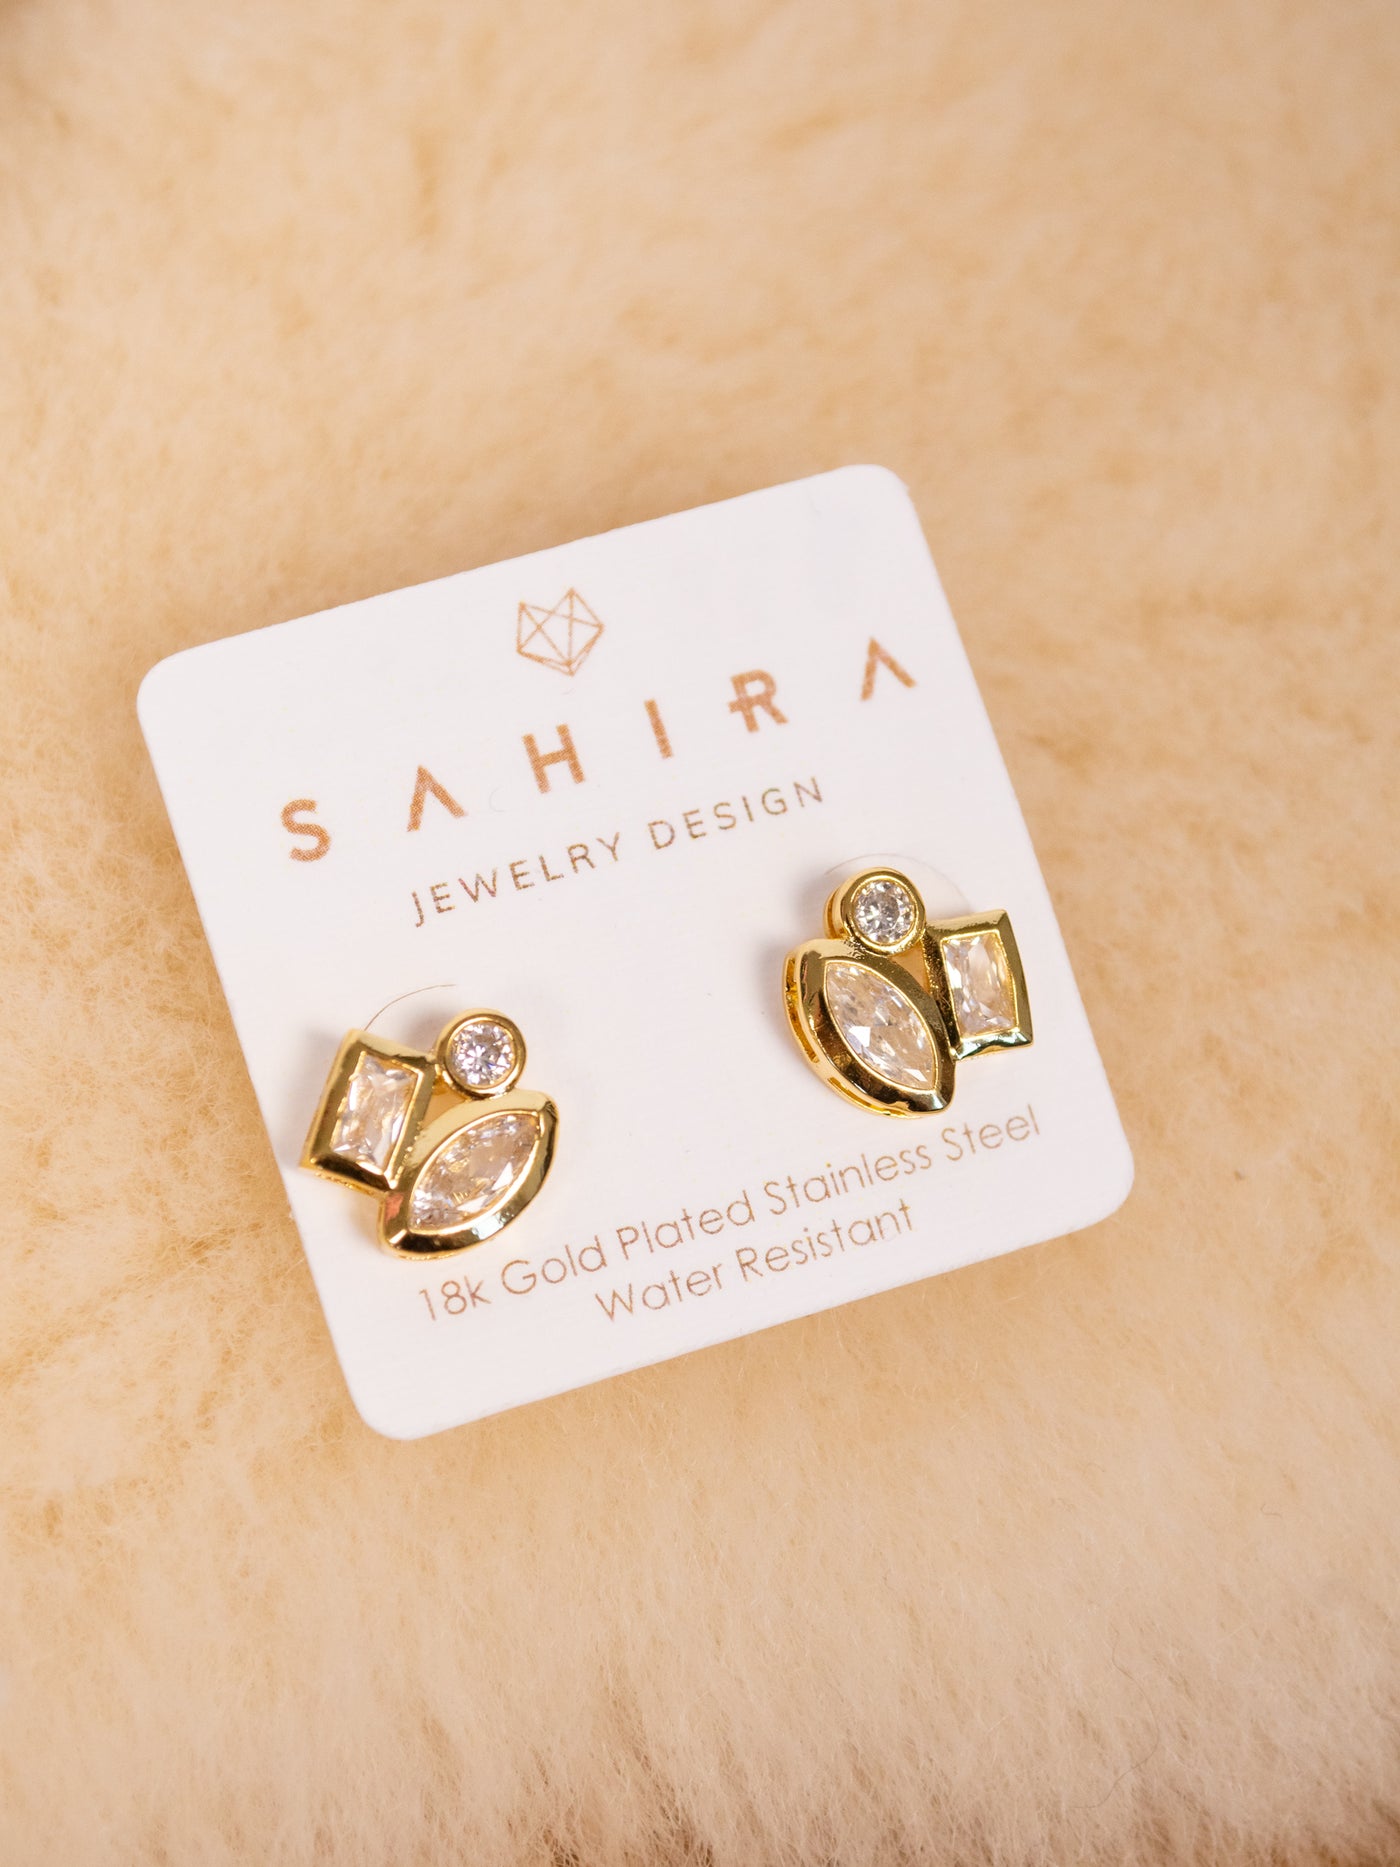 A pair of gold studs with three CZ stones on the from. One is circular, one oval, and one rectangle.